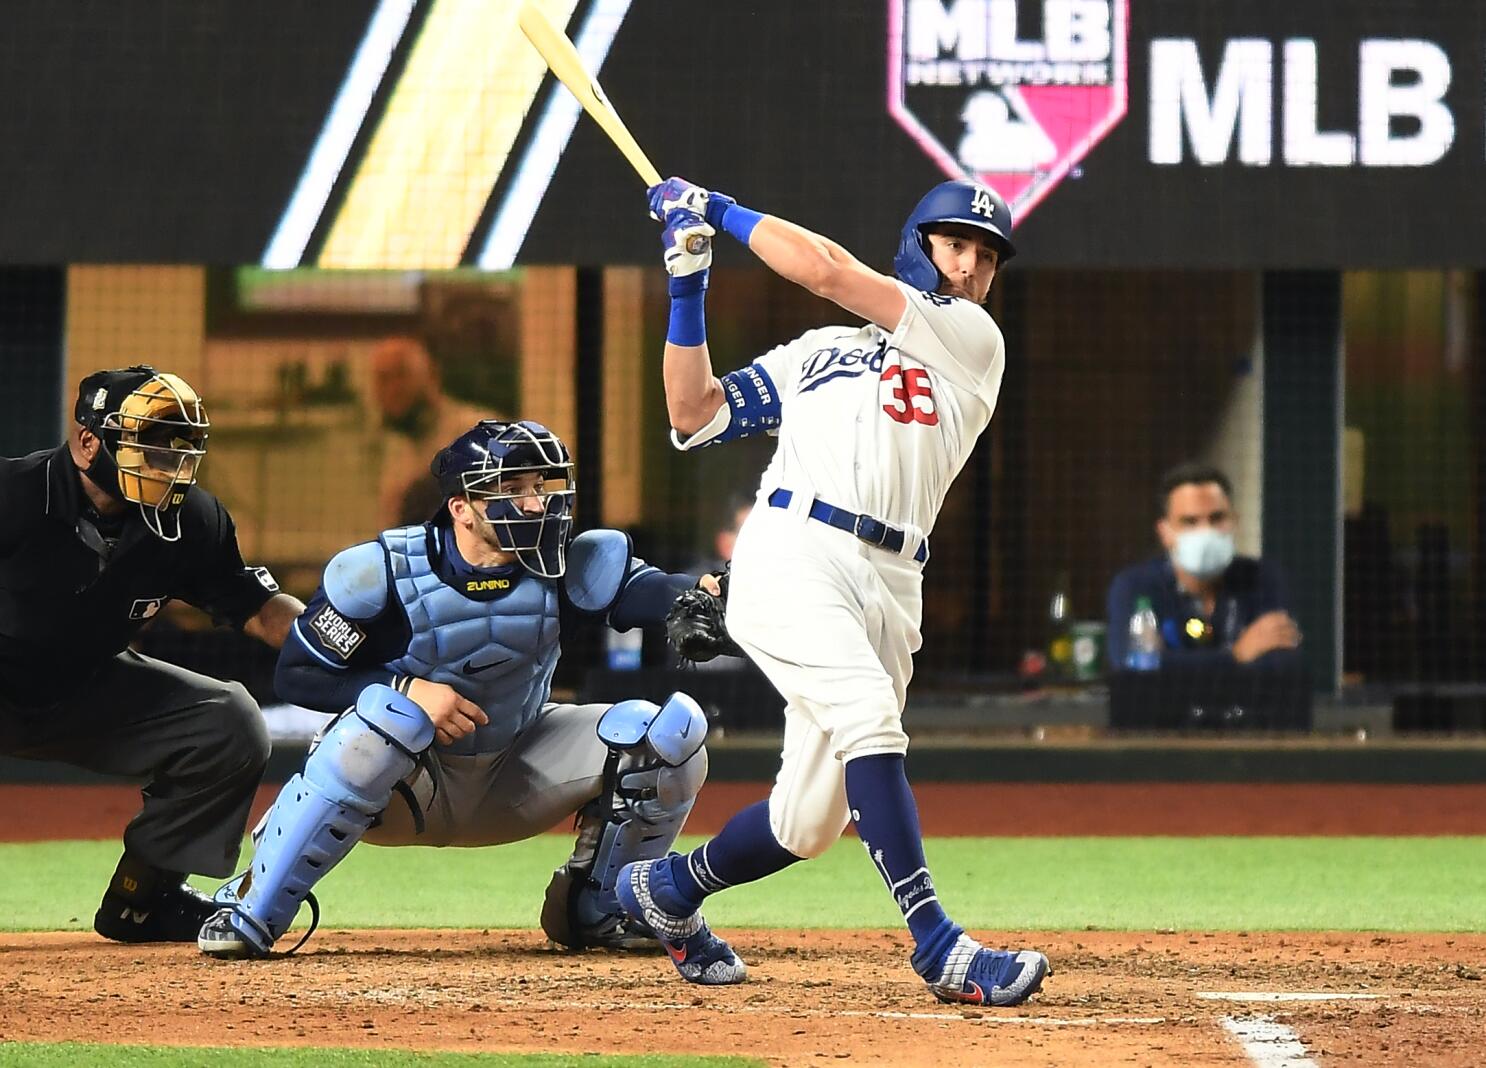 Chris Taylor, Cody Bellinger and Mookie Betts - Tampa Bay Rays - 5